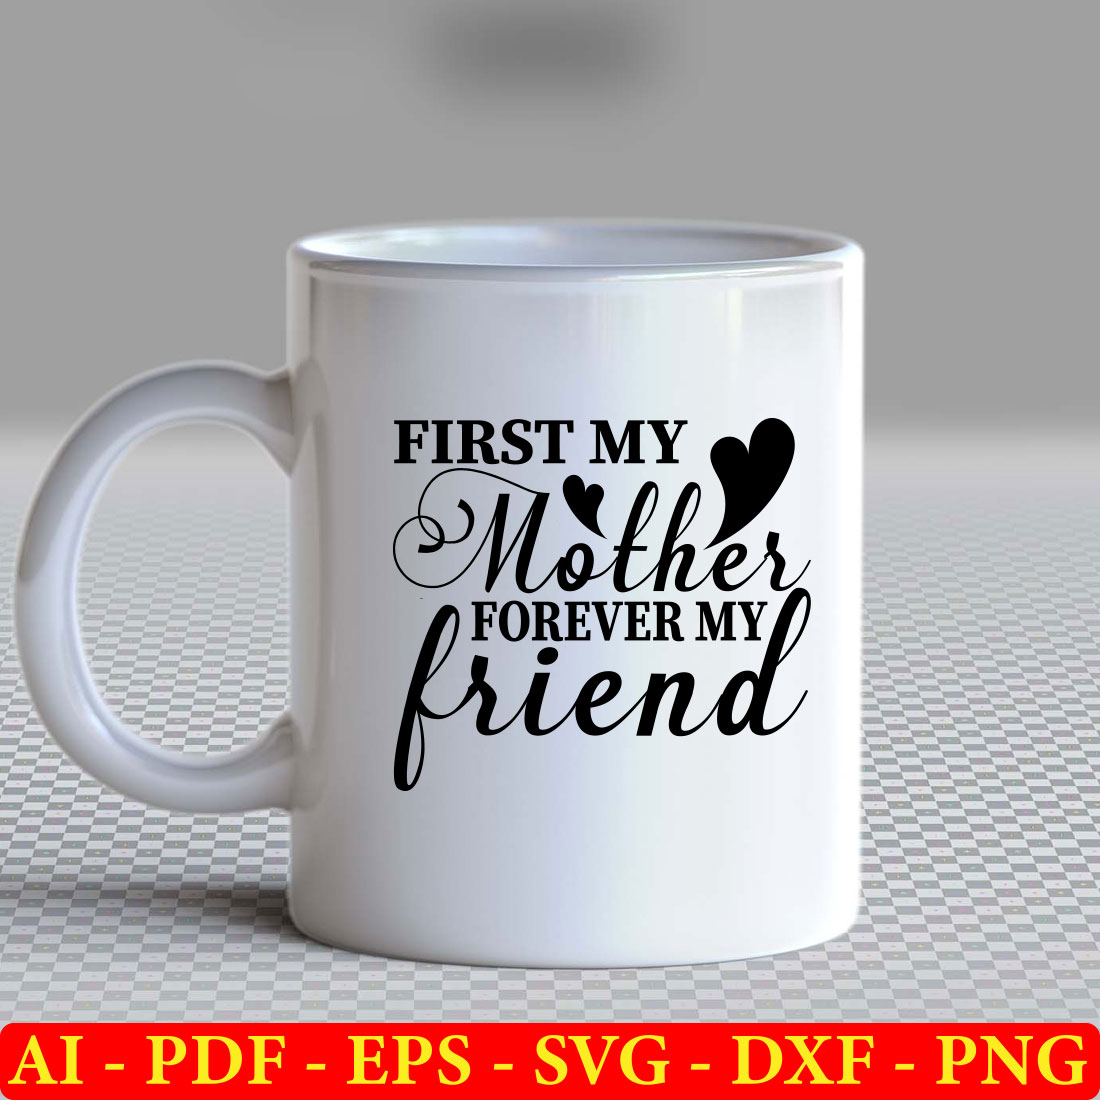 White coffee mug with the words first my mother forever my friend.